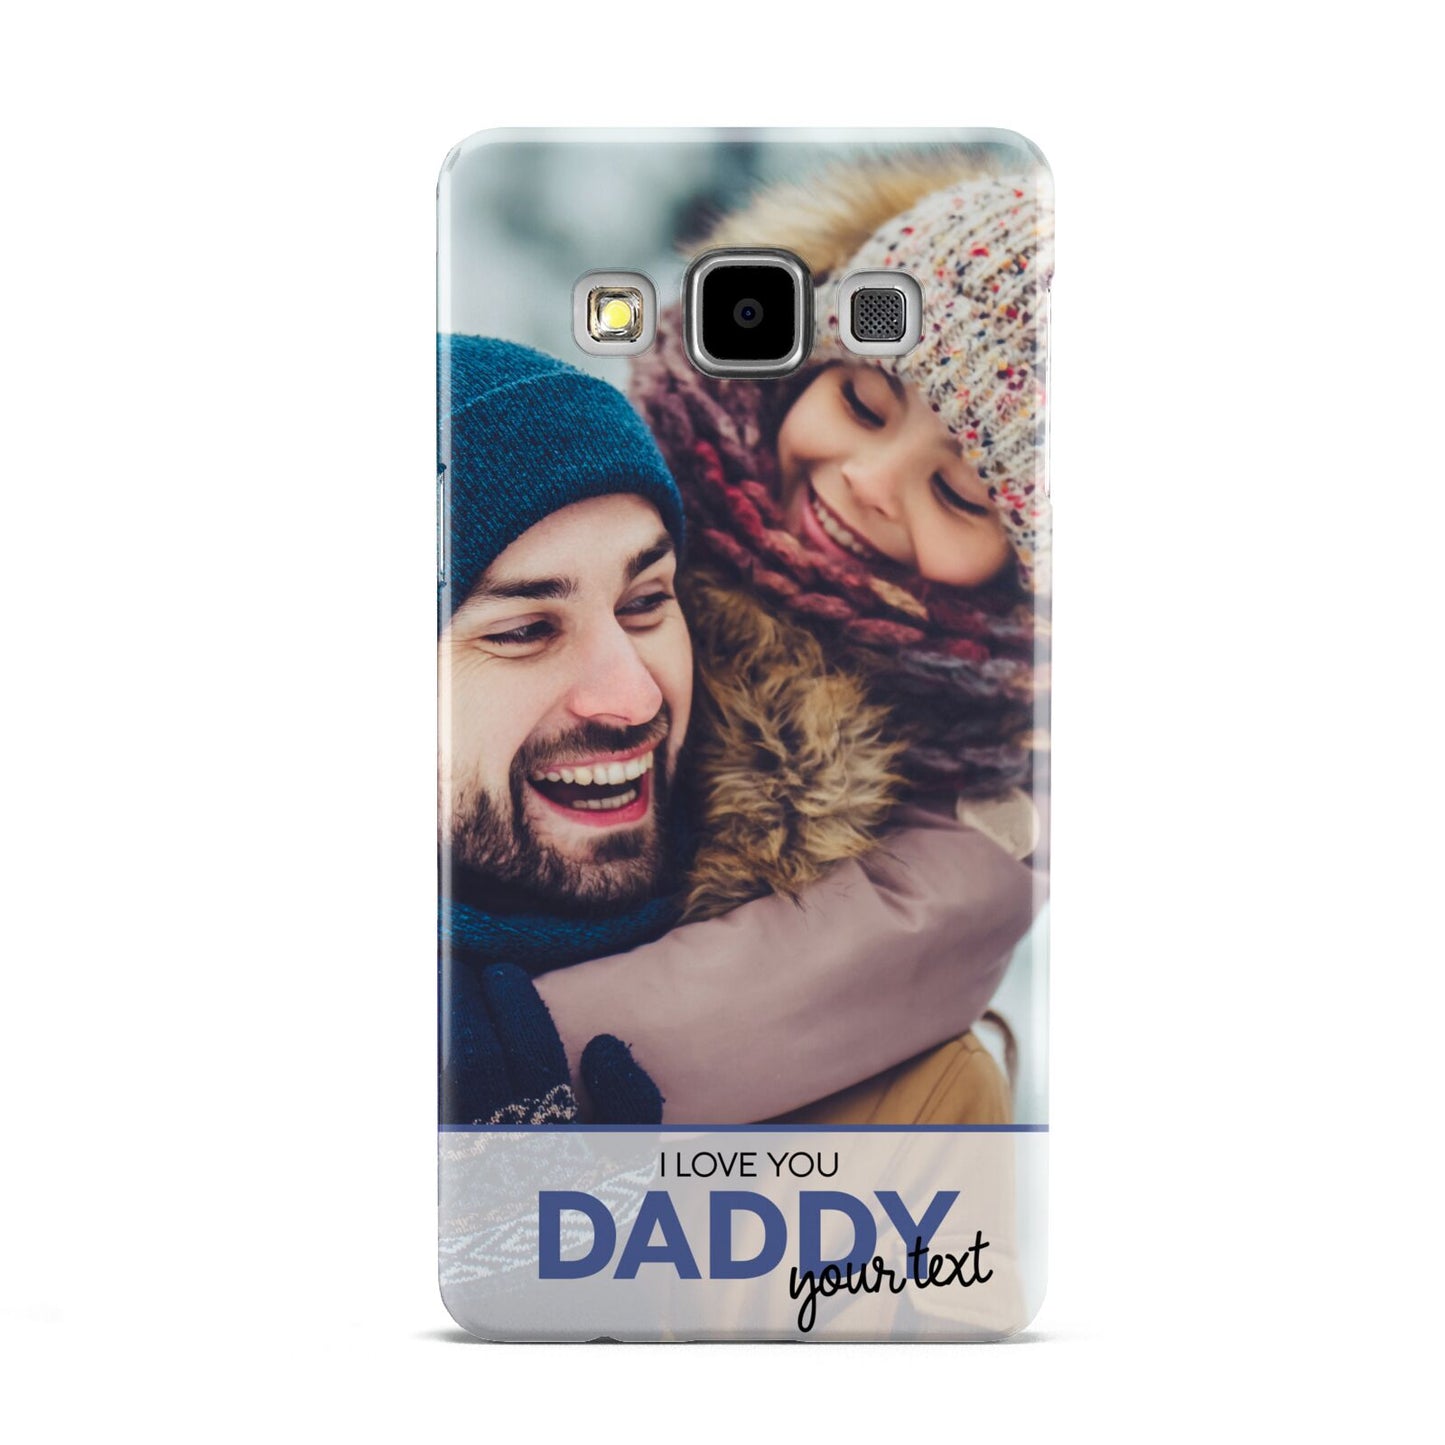 I Love You Daddy Personalised Photo Upload and Name Samsung Galaxy A5 Case